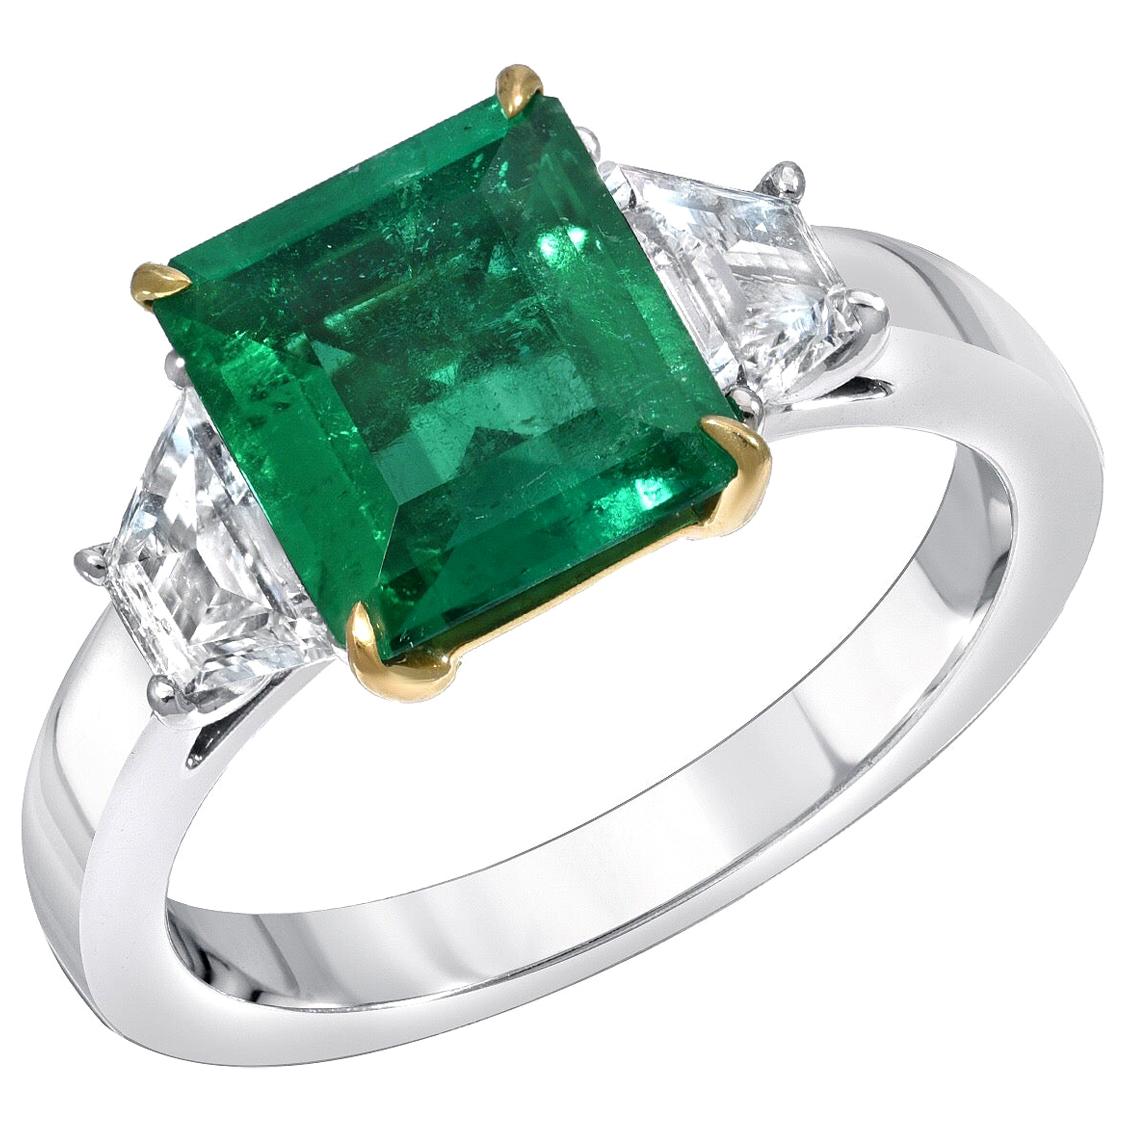 Colombian Emerald Ring Emerald Cut 1.85 Carats AGL Certified Insignificant Oil